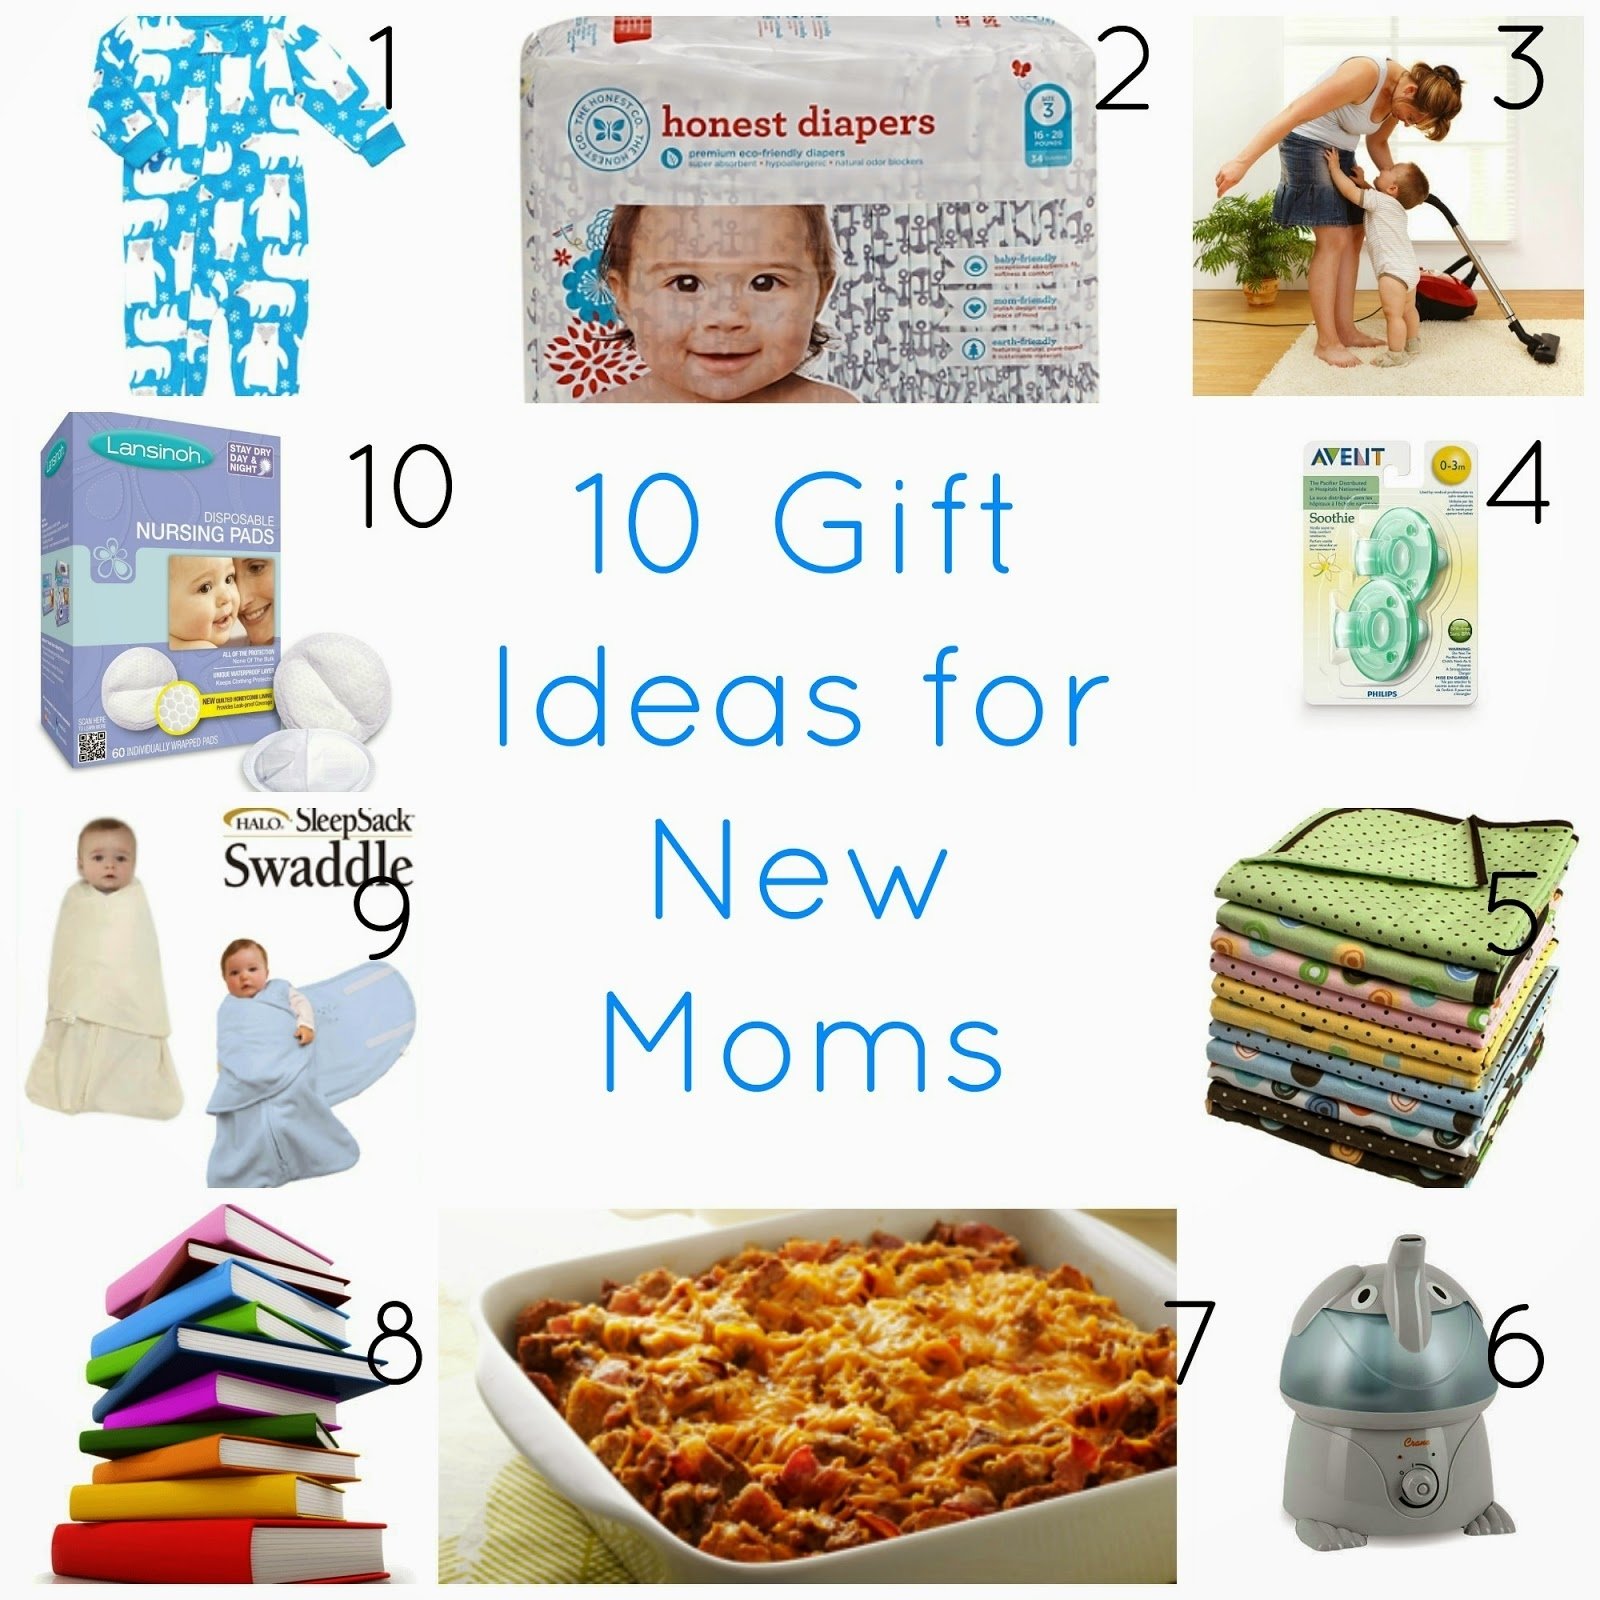 10 Most Recommended Gift Ideas For A New Mom beeautiful blessings 10 gift ideas for new moms 3 2022